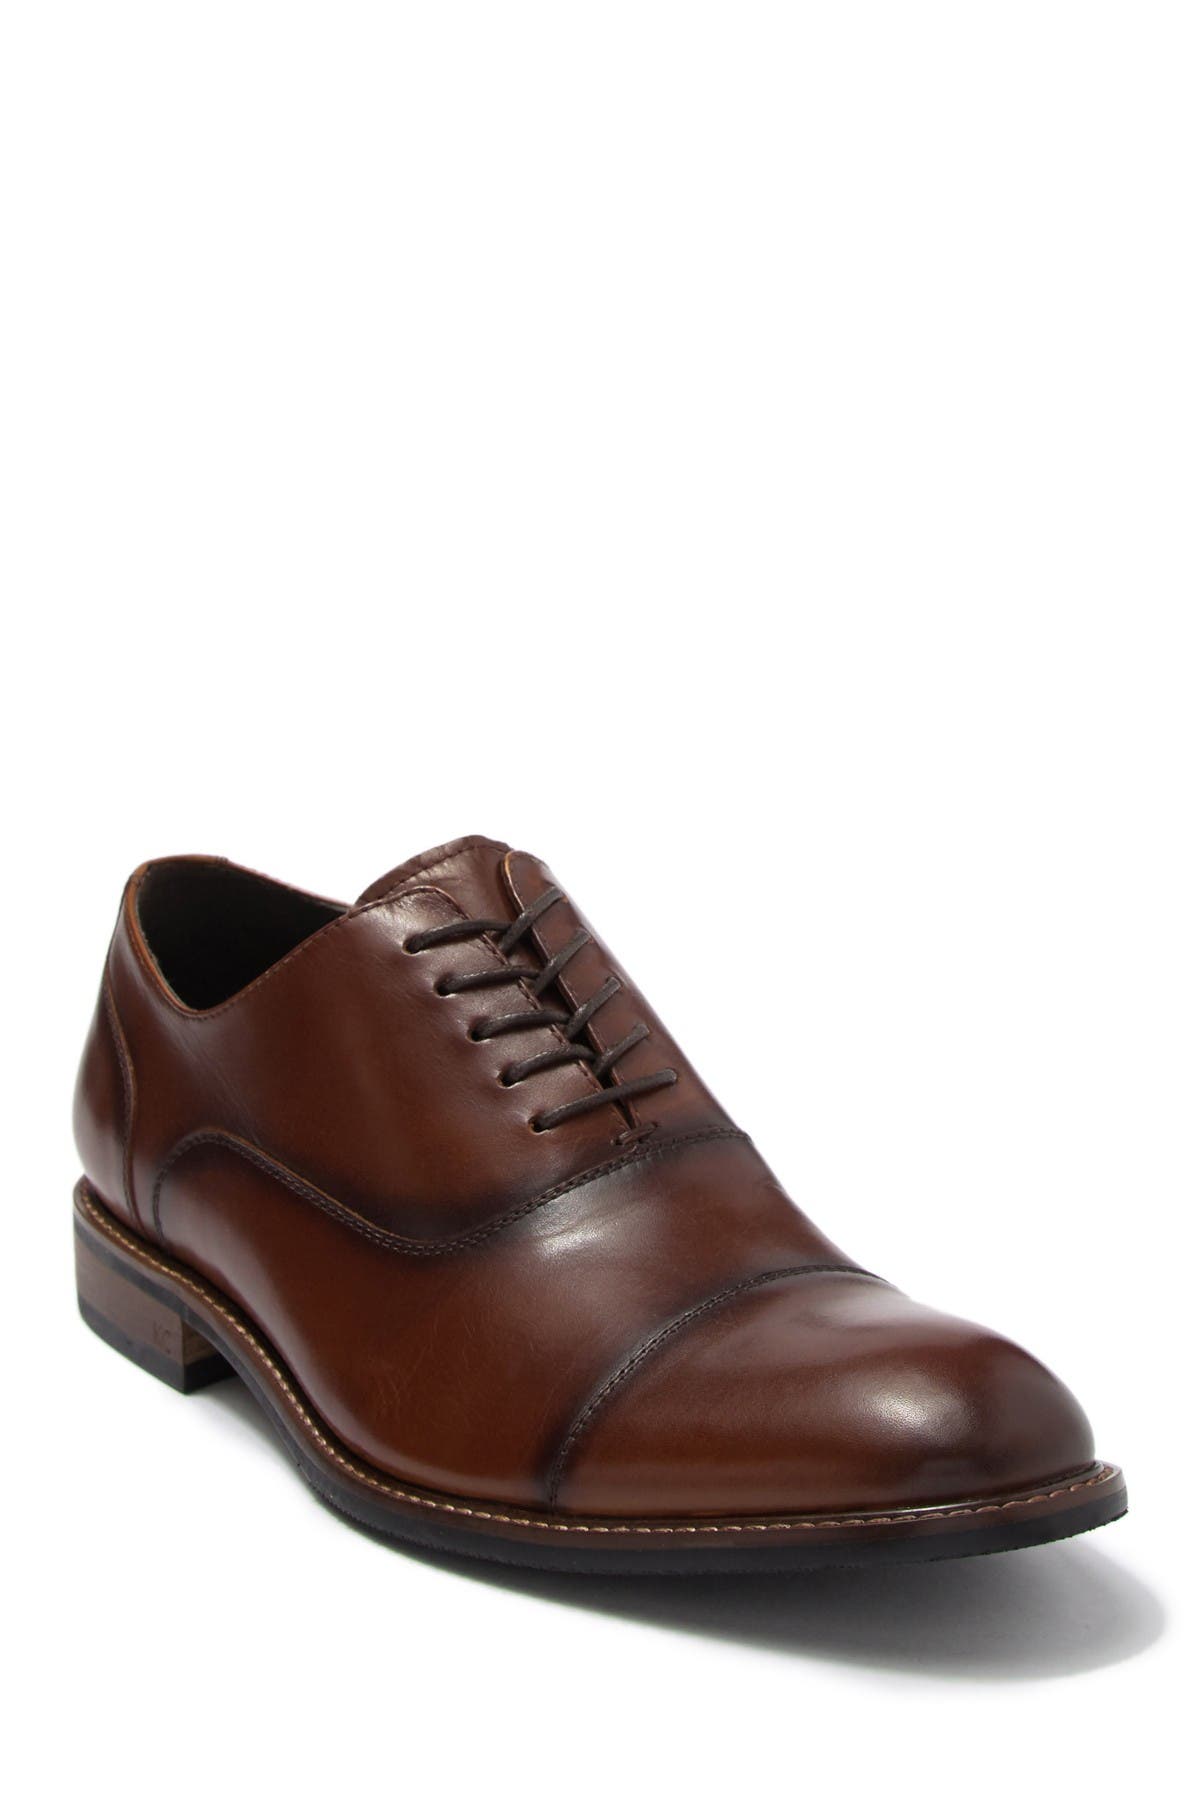 kenneth cole oxford shoes